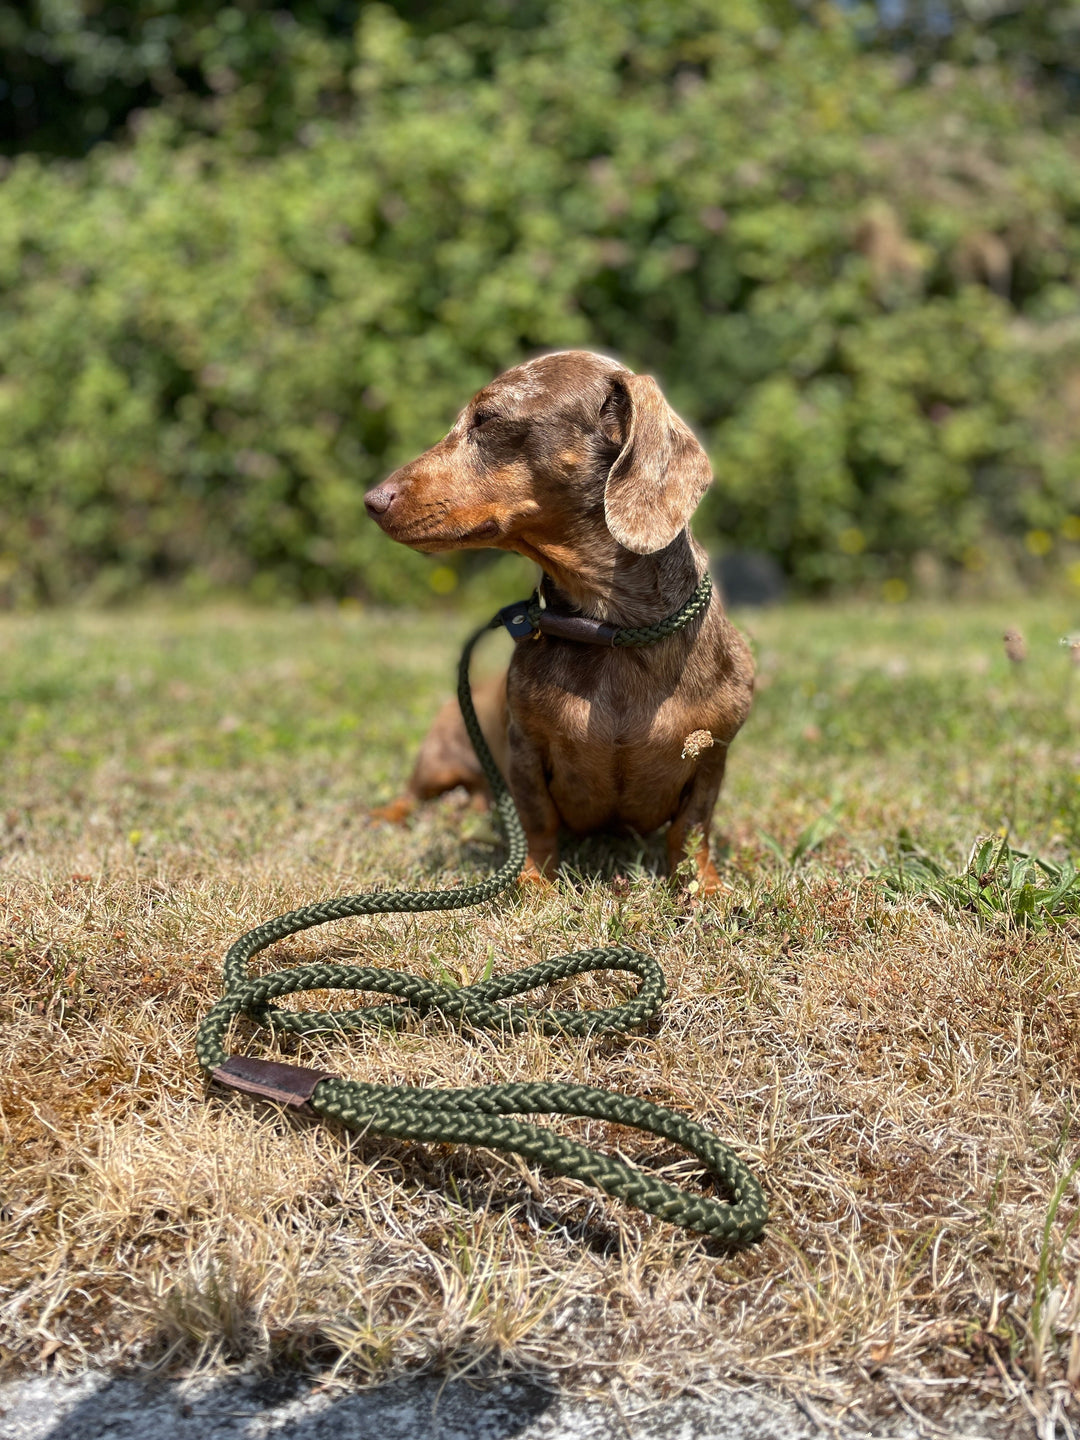 A dog is sitting on a grass field tied with rope slip leads